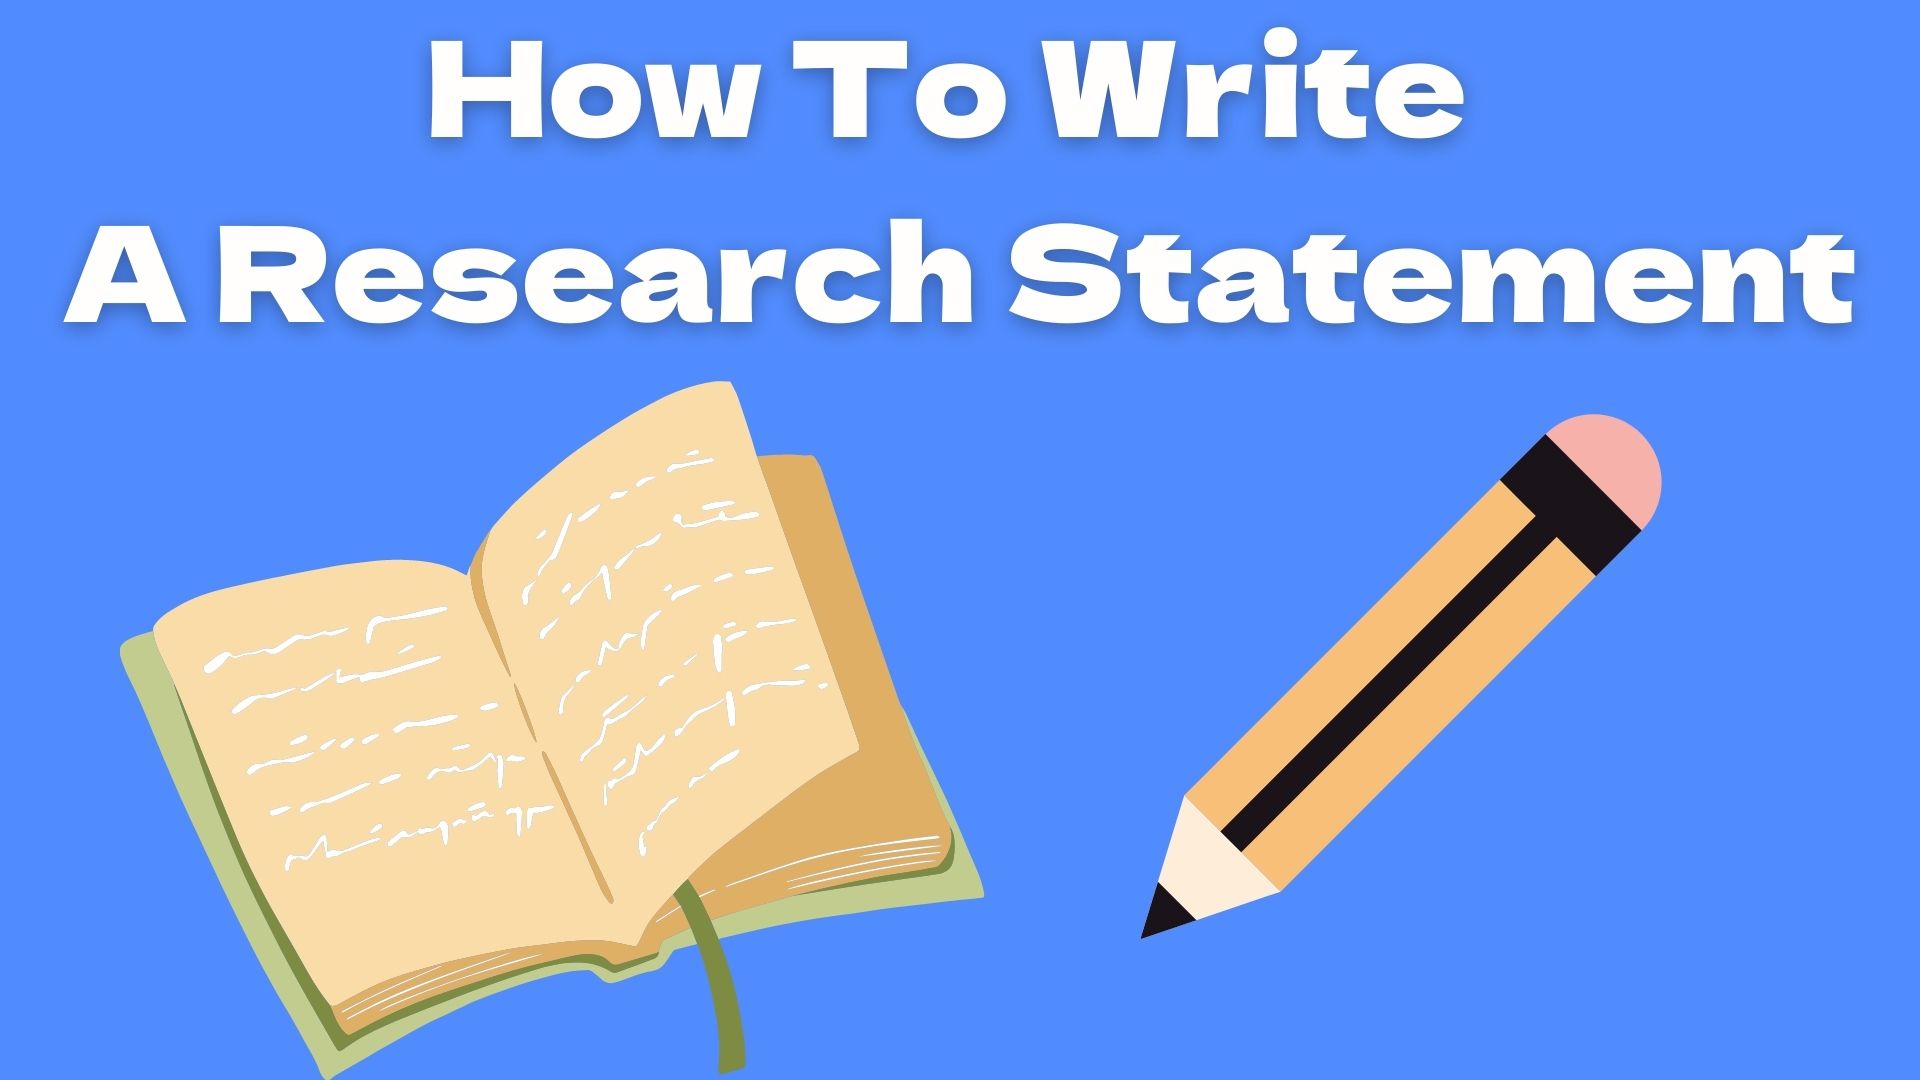 How To Write A Research Statement